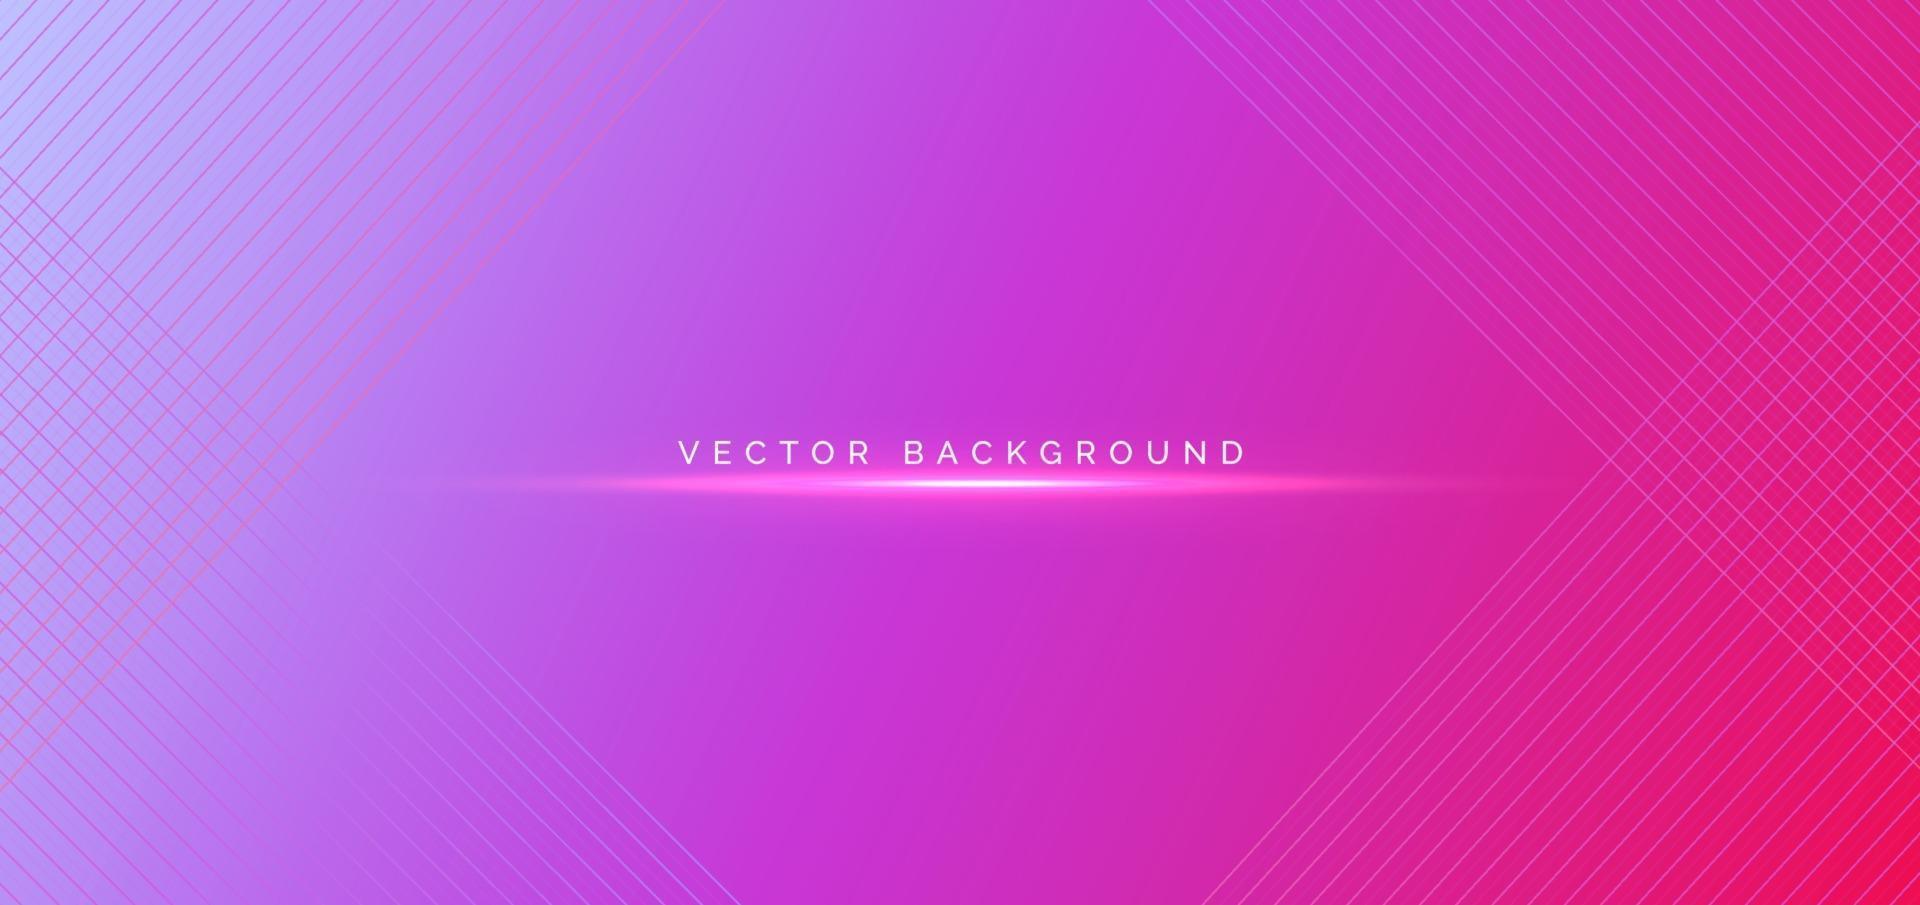 Abstract modern pink and purple color gradient background with diagonal lines pattern. vector